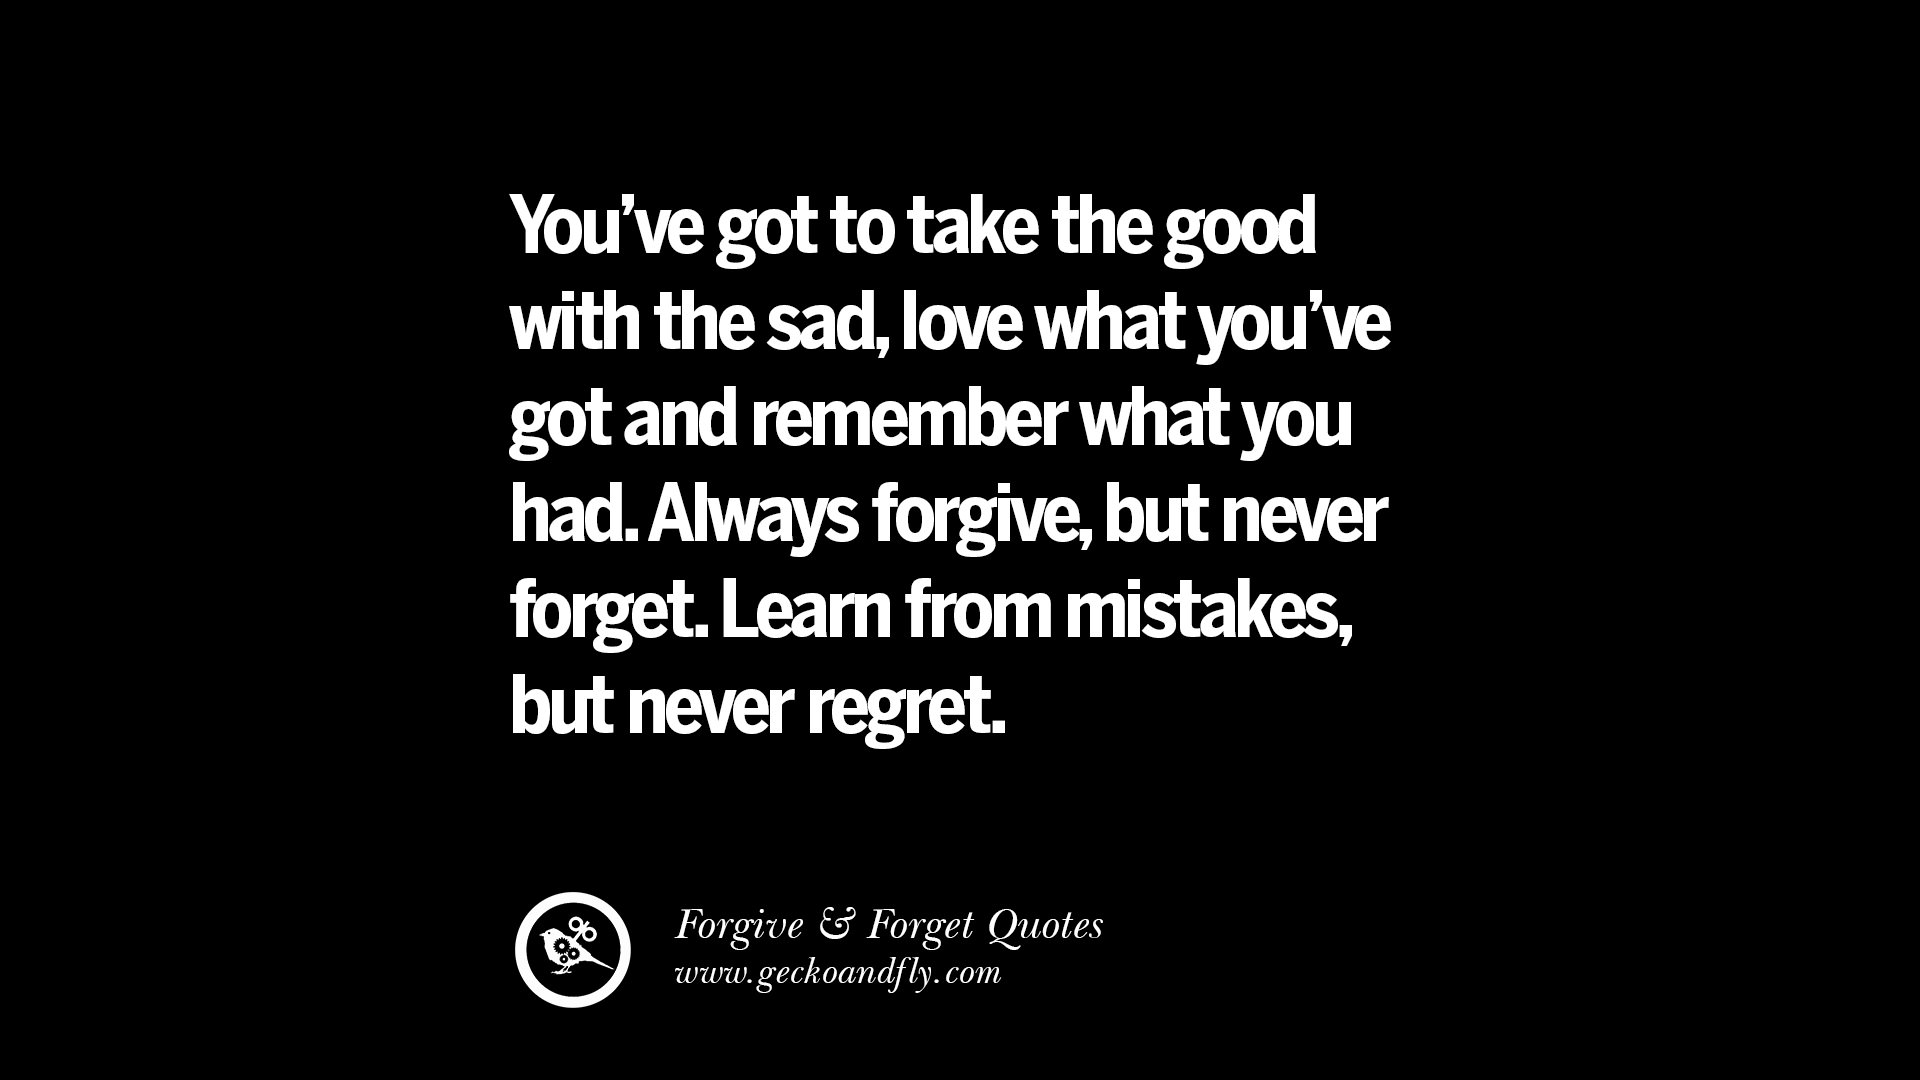 You ve got to take the good with the sad love what you ve got and remember what you had Always forgive but never for Learn from mistakes but never